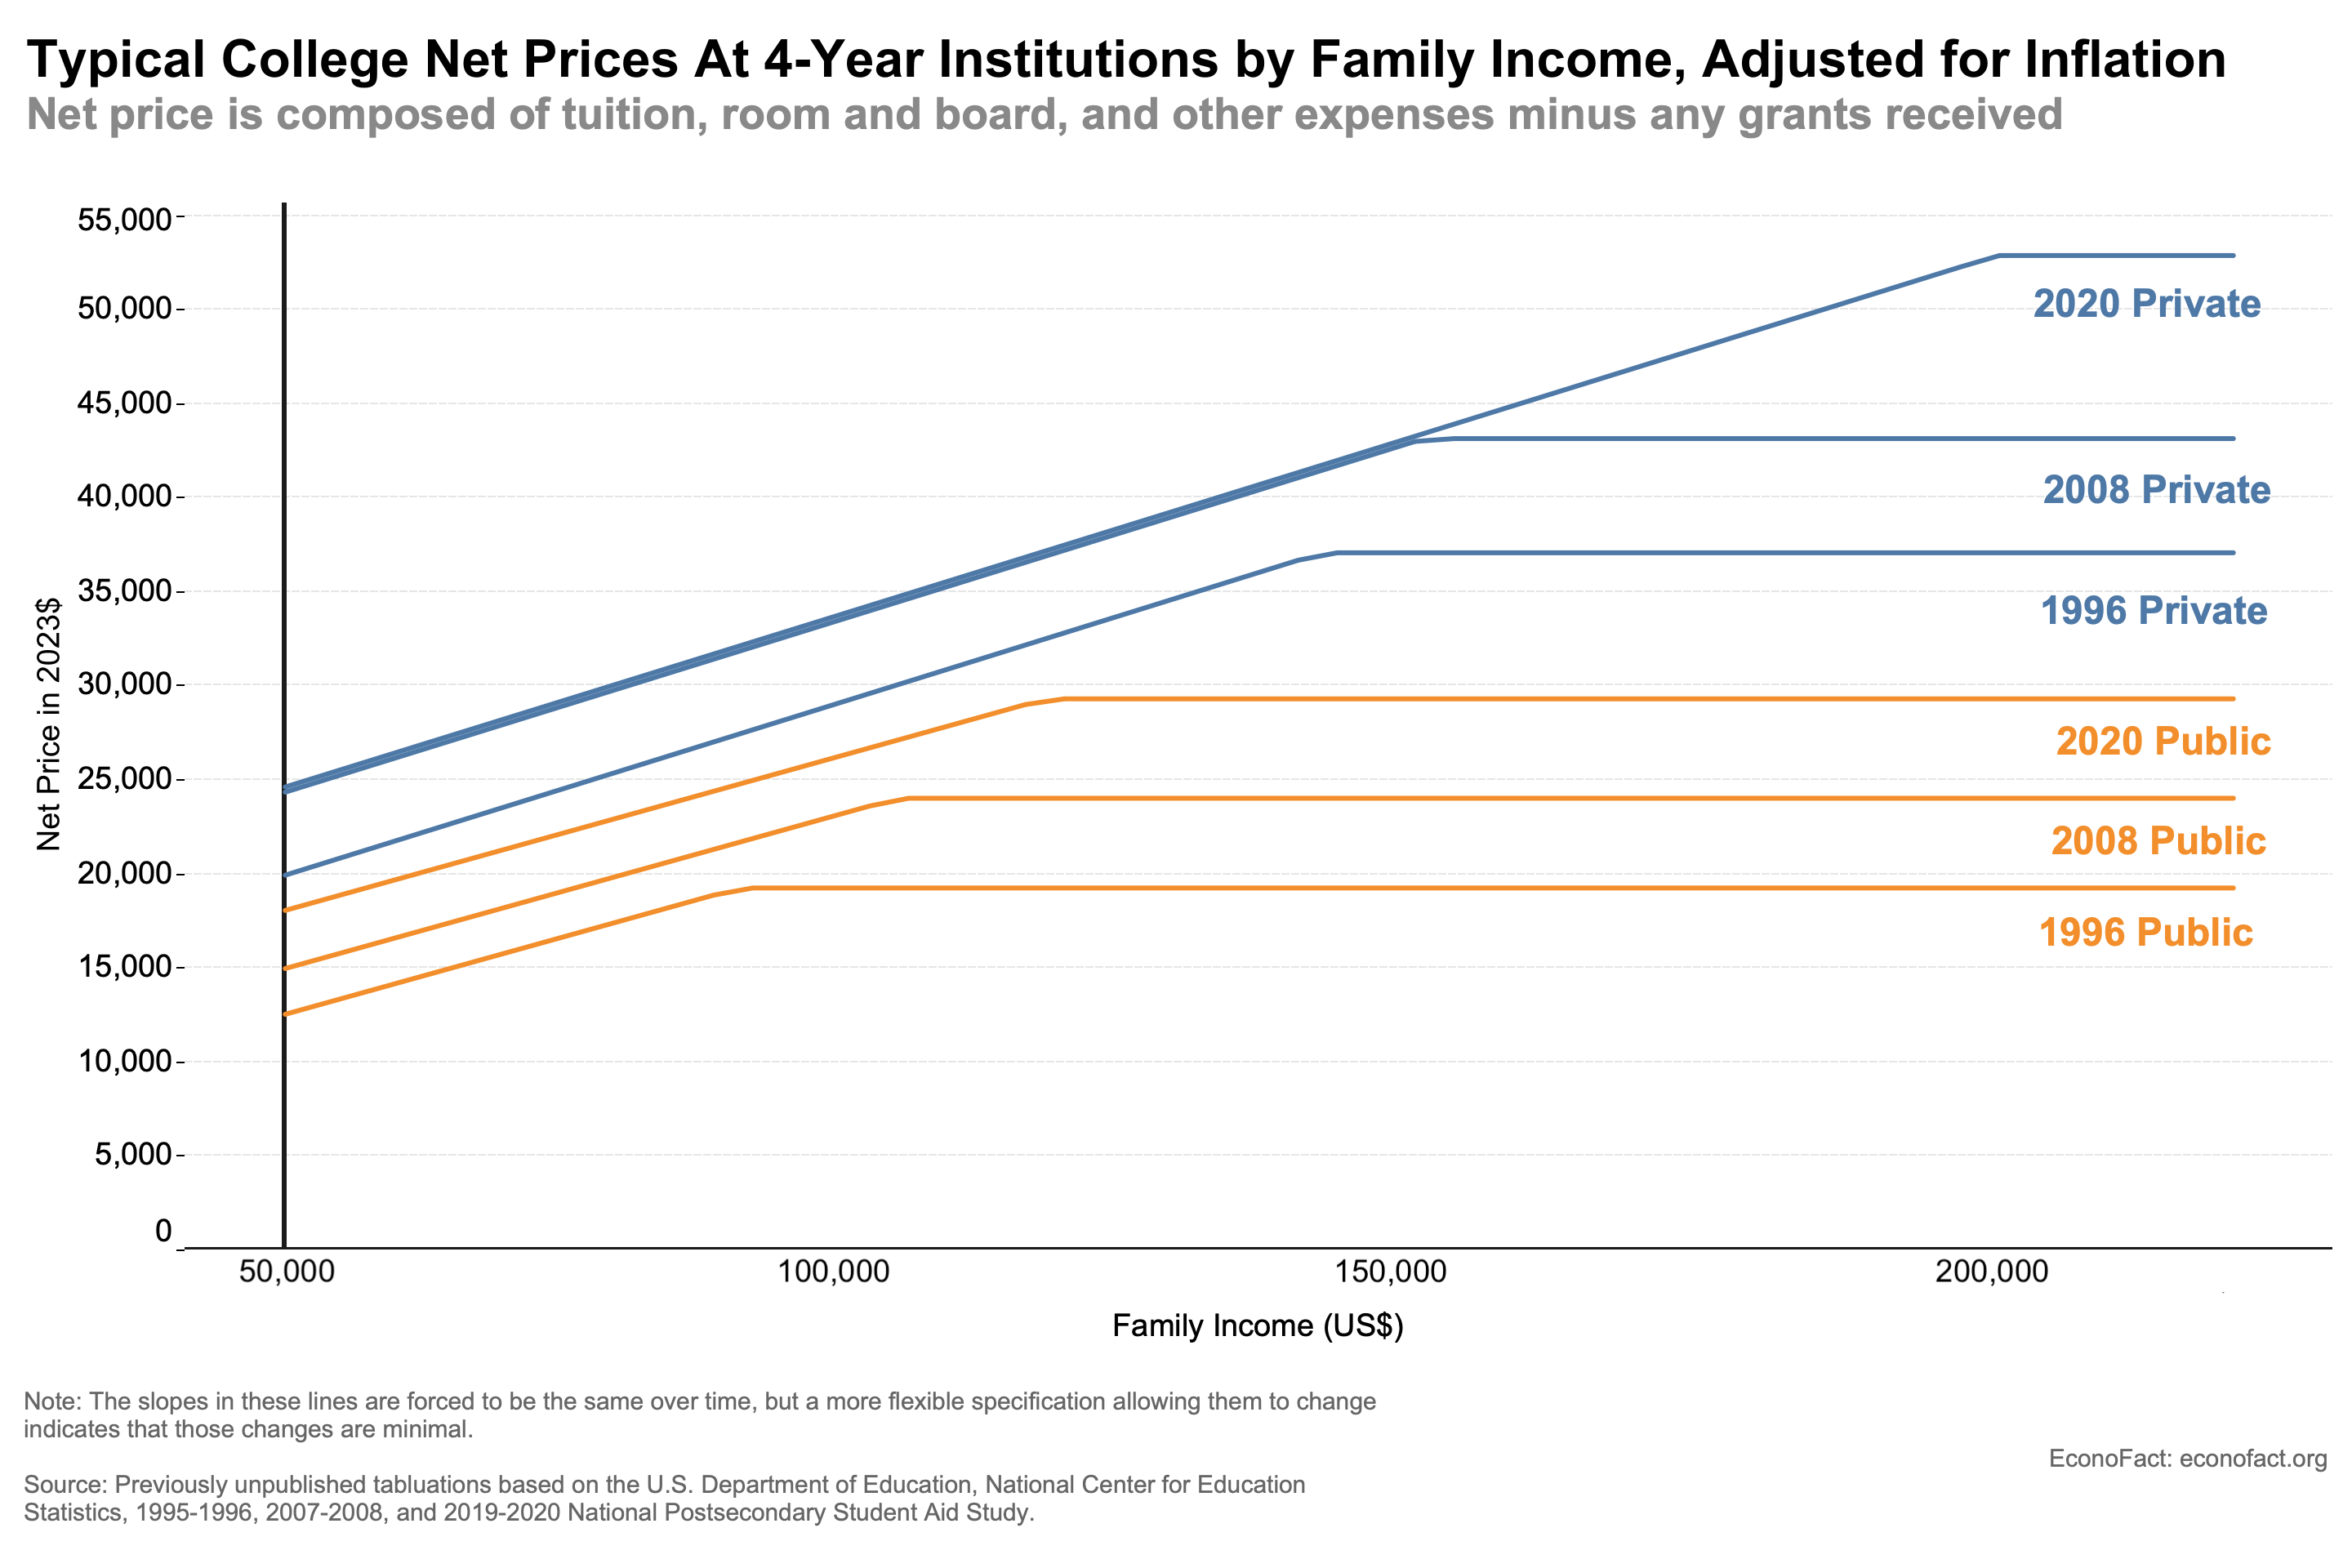 Typical College Net Prices At 4-Year Institutions by Family Income, Adjusted for Inflation